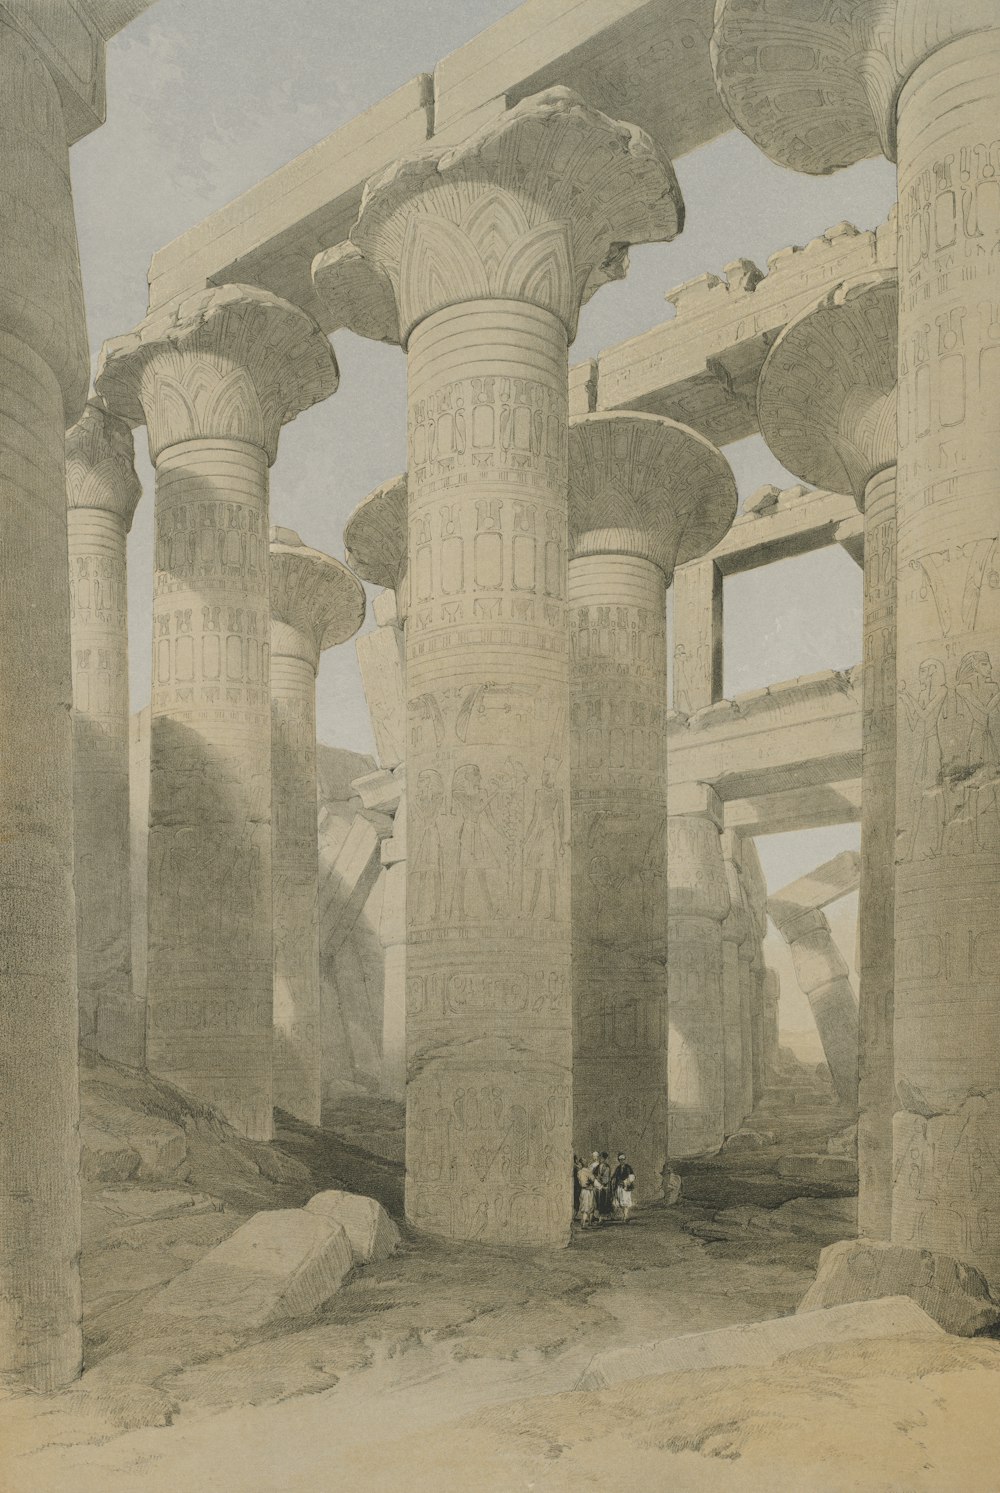 a drawing of a group of pillars in a desert